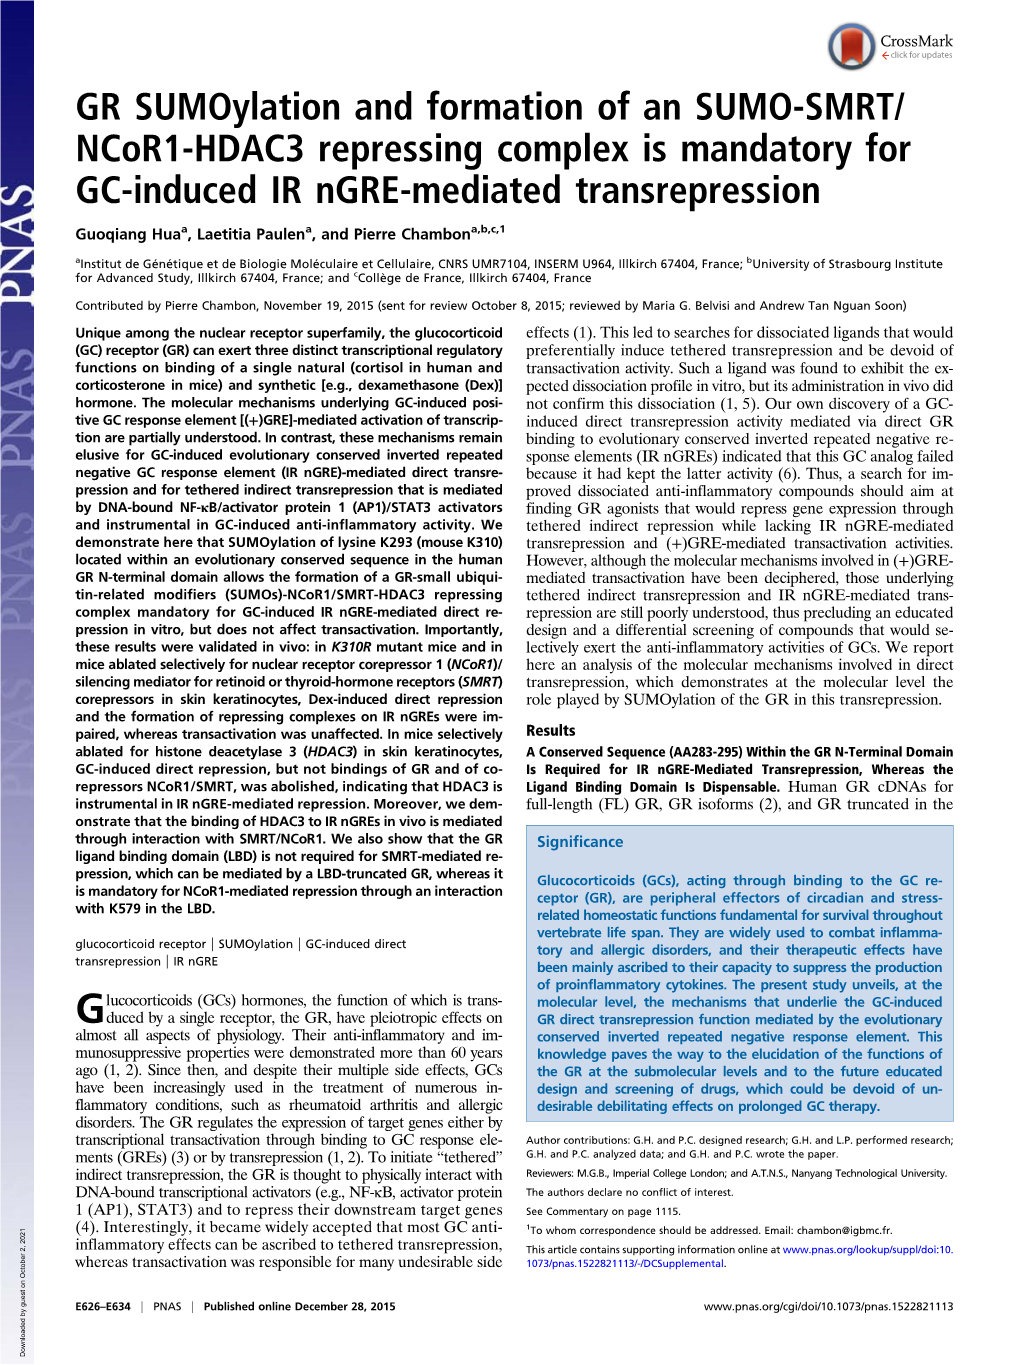 GR Sumoylation and Formation of an SUMO-SMRT/Ncor1-HDAC3 Repressing Complex Is Mandatory for GC-Induced IR Ngre-Mediated Transre